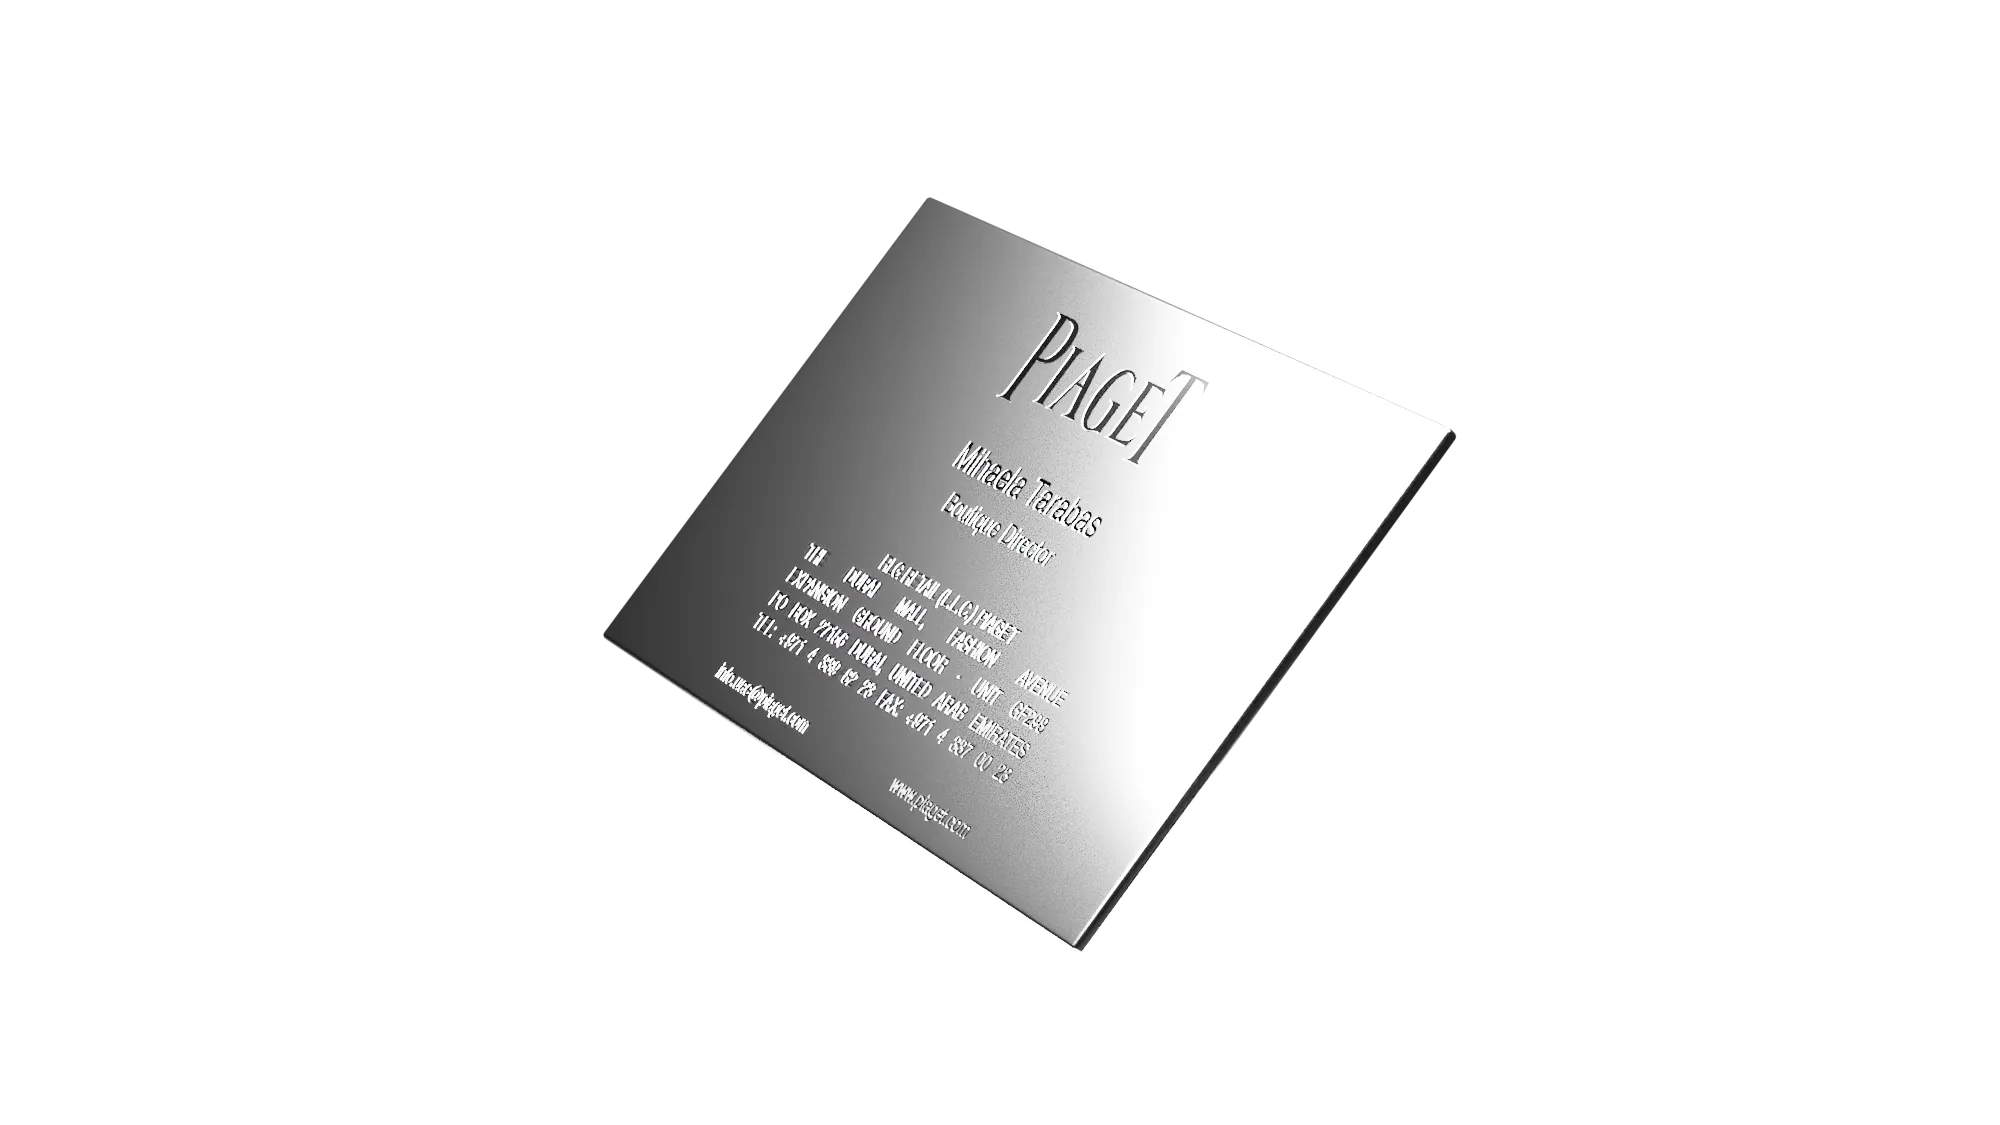 rendered sterling silver Piaget business card oblique angle